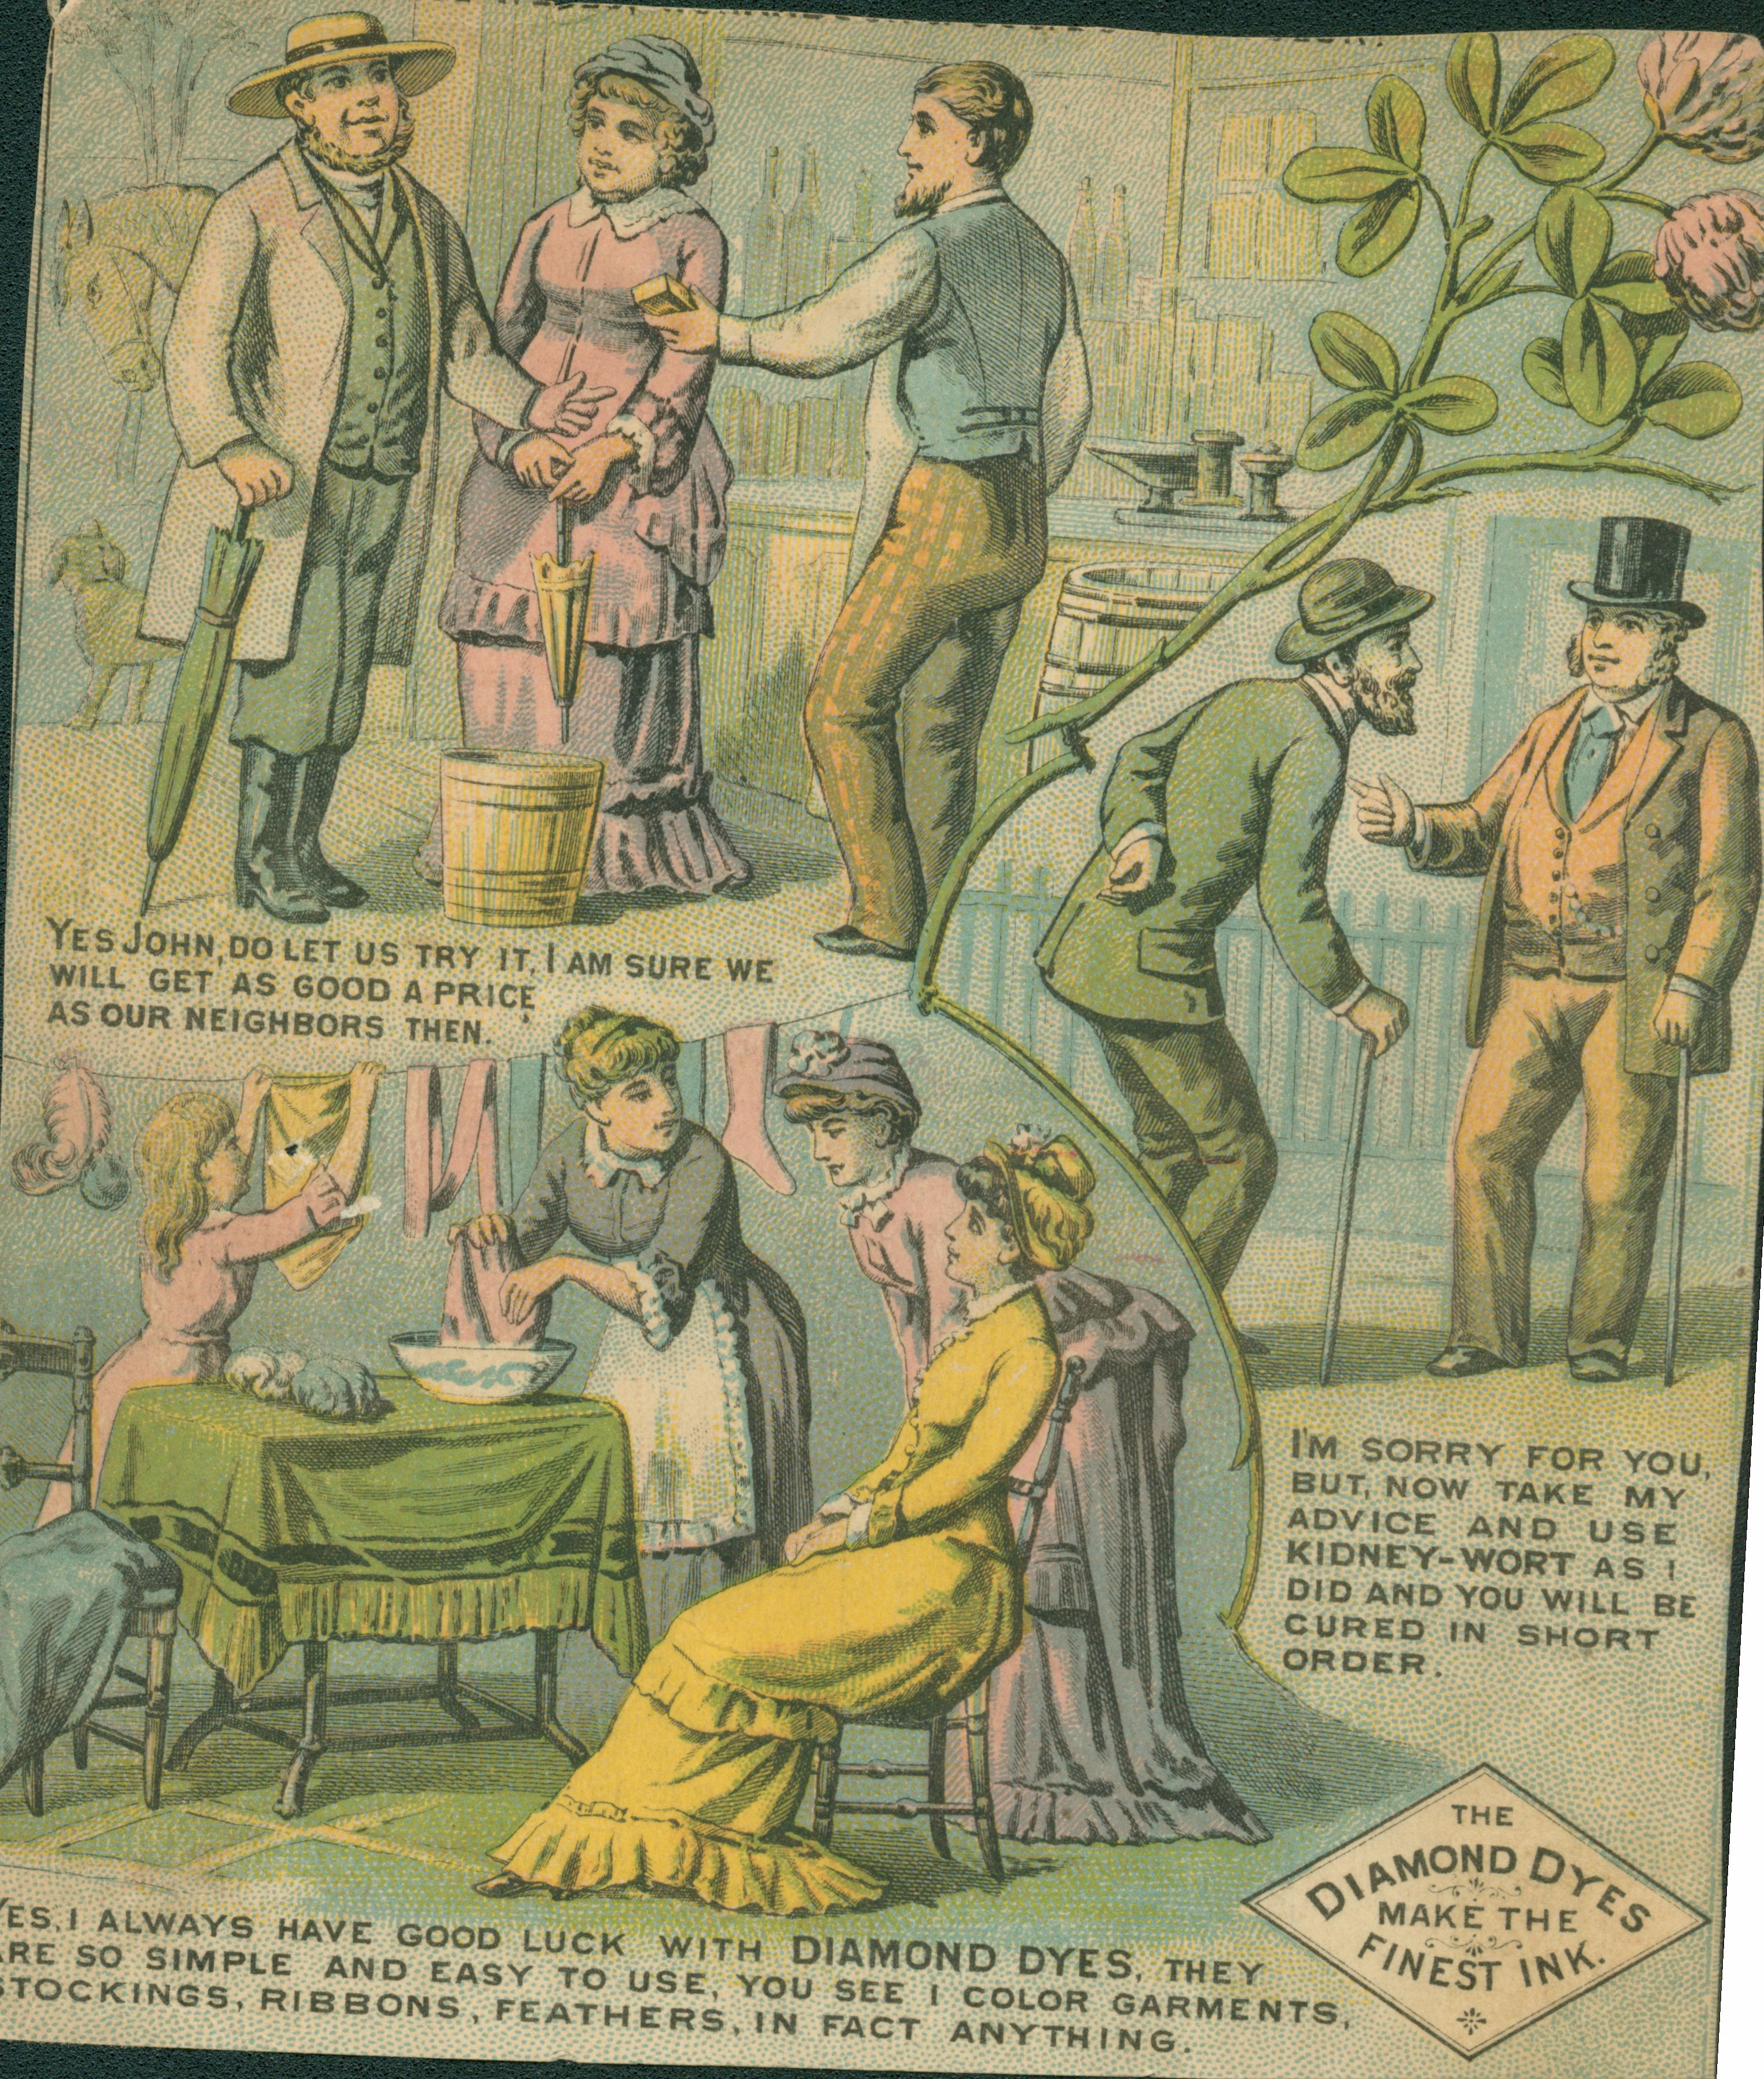 Image shows men and women in various vignettes.